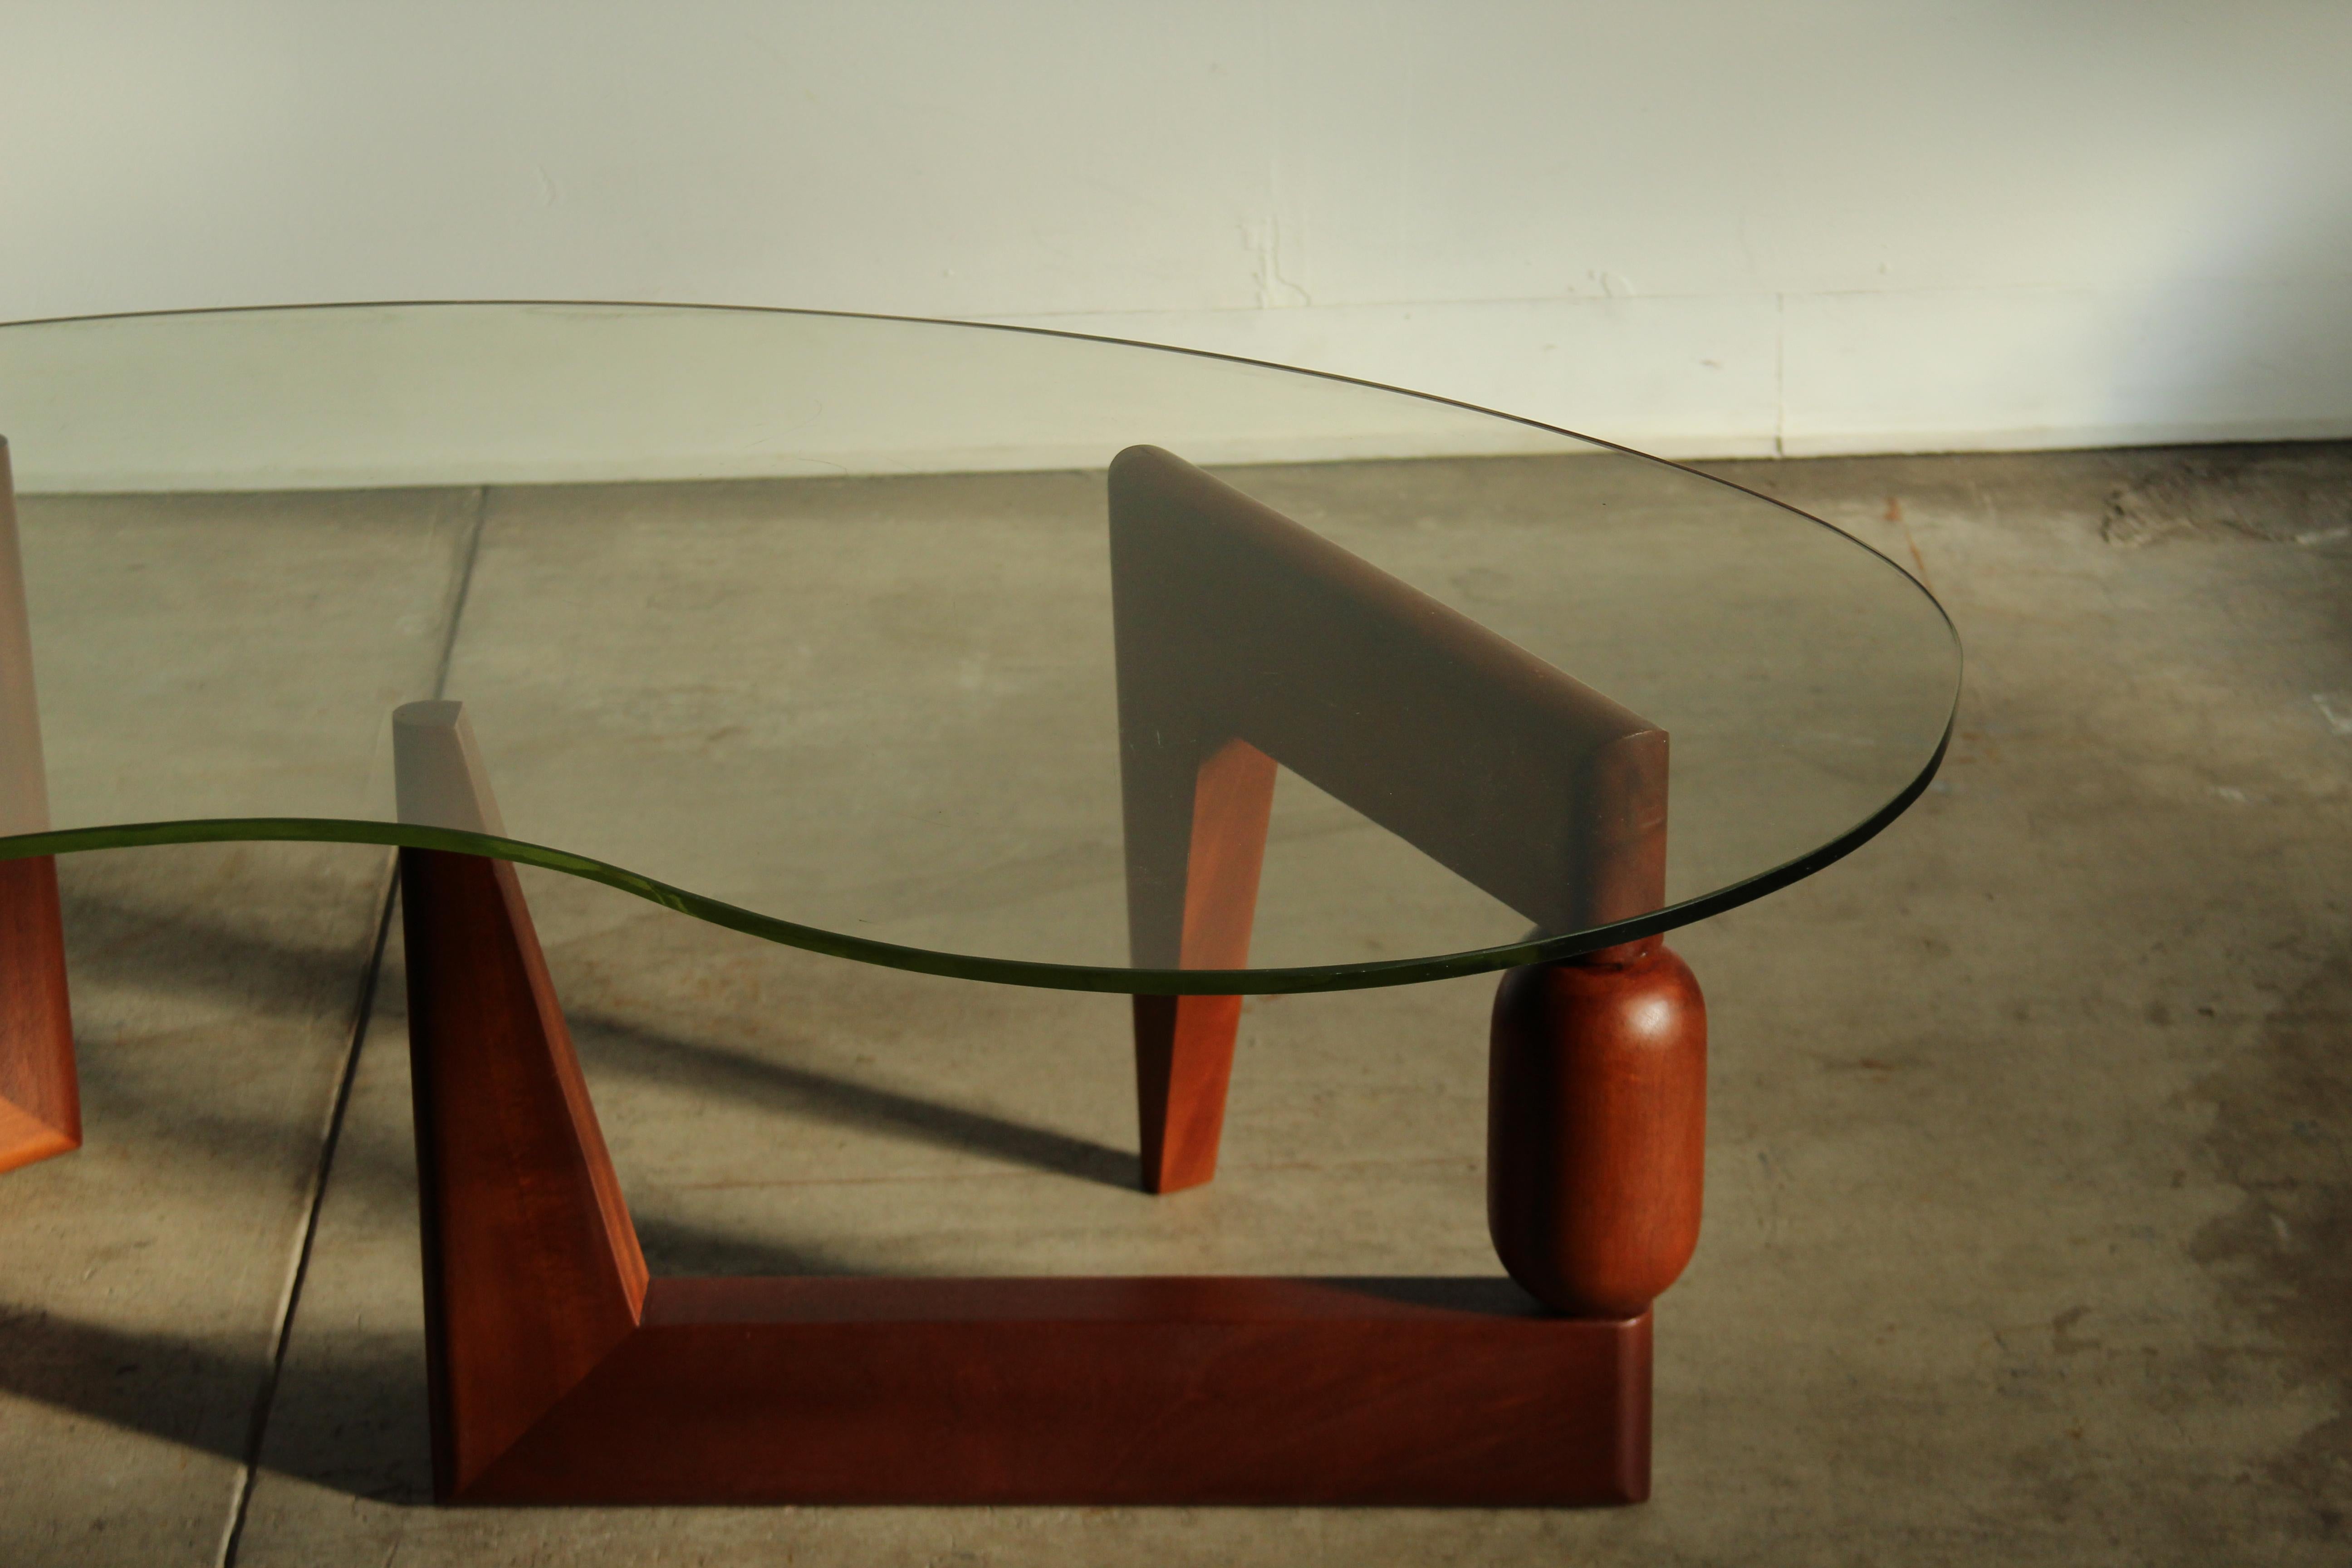 Sculptural Freeform Coffee Table in the Manner of Isamu Noguchi, 1970s For Sale 1